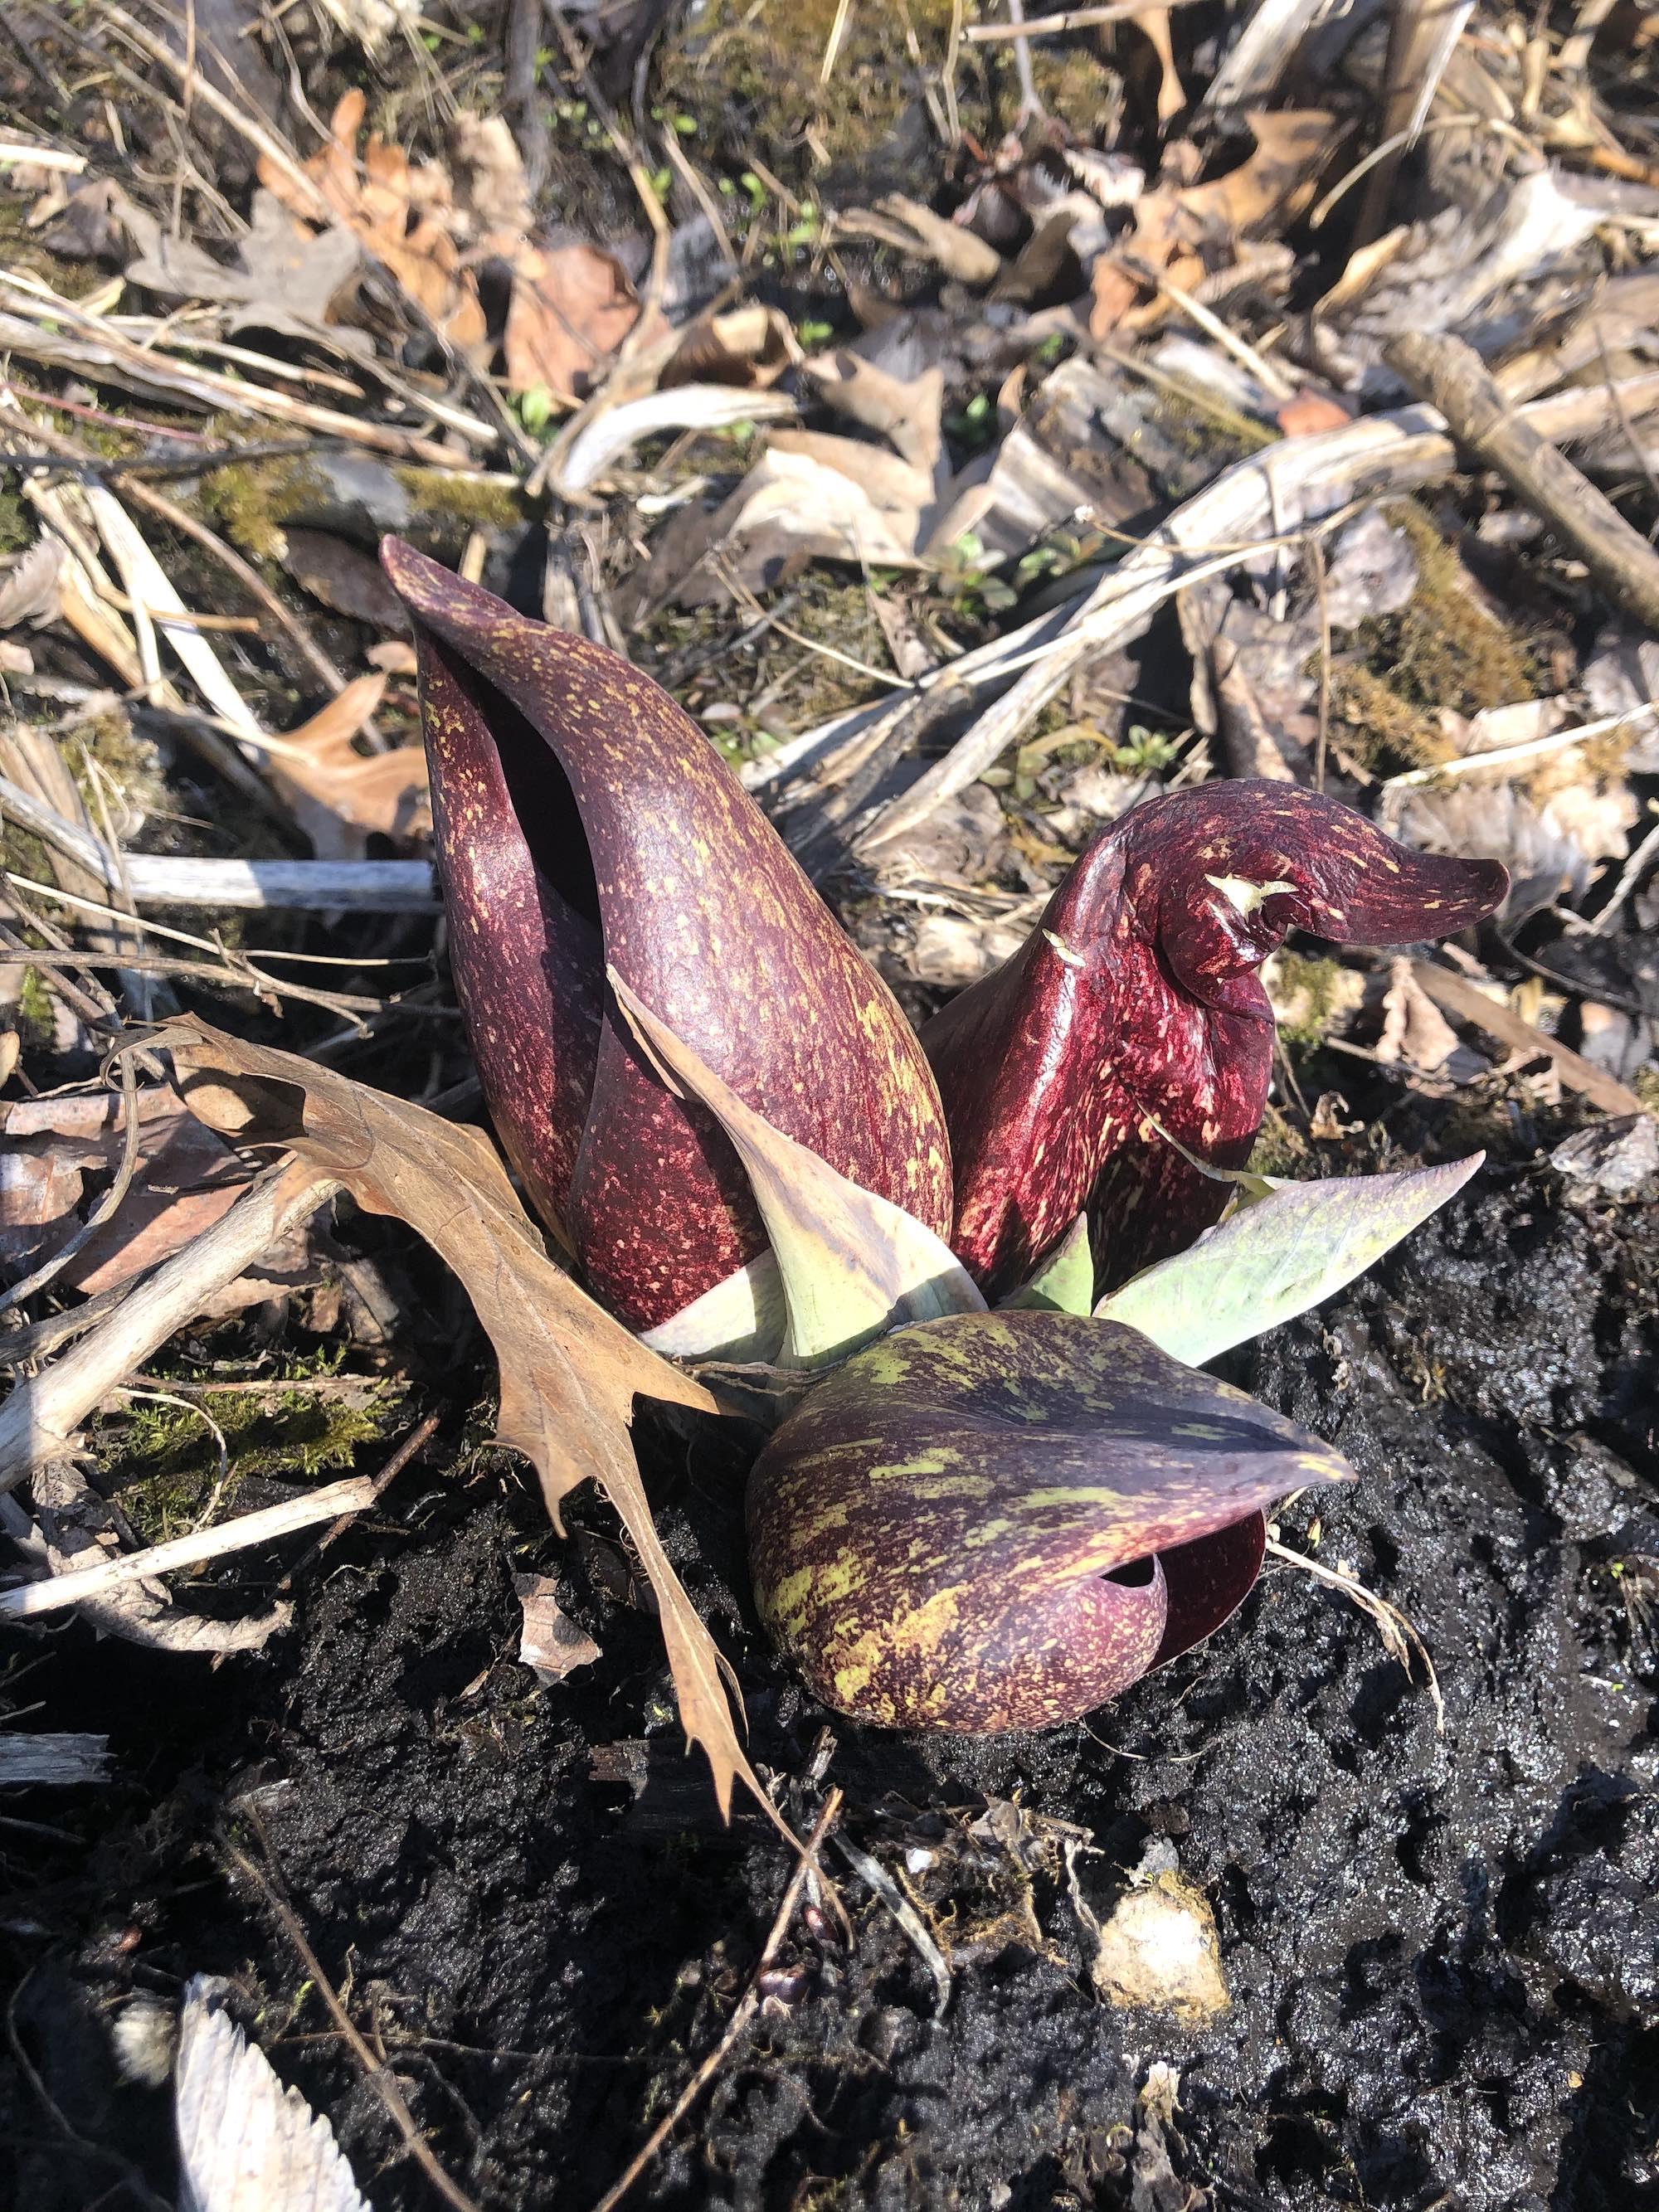 Skunk Cabbage in UW-Madison Arboretum on March 20, 2021 the first day of Spring.